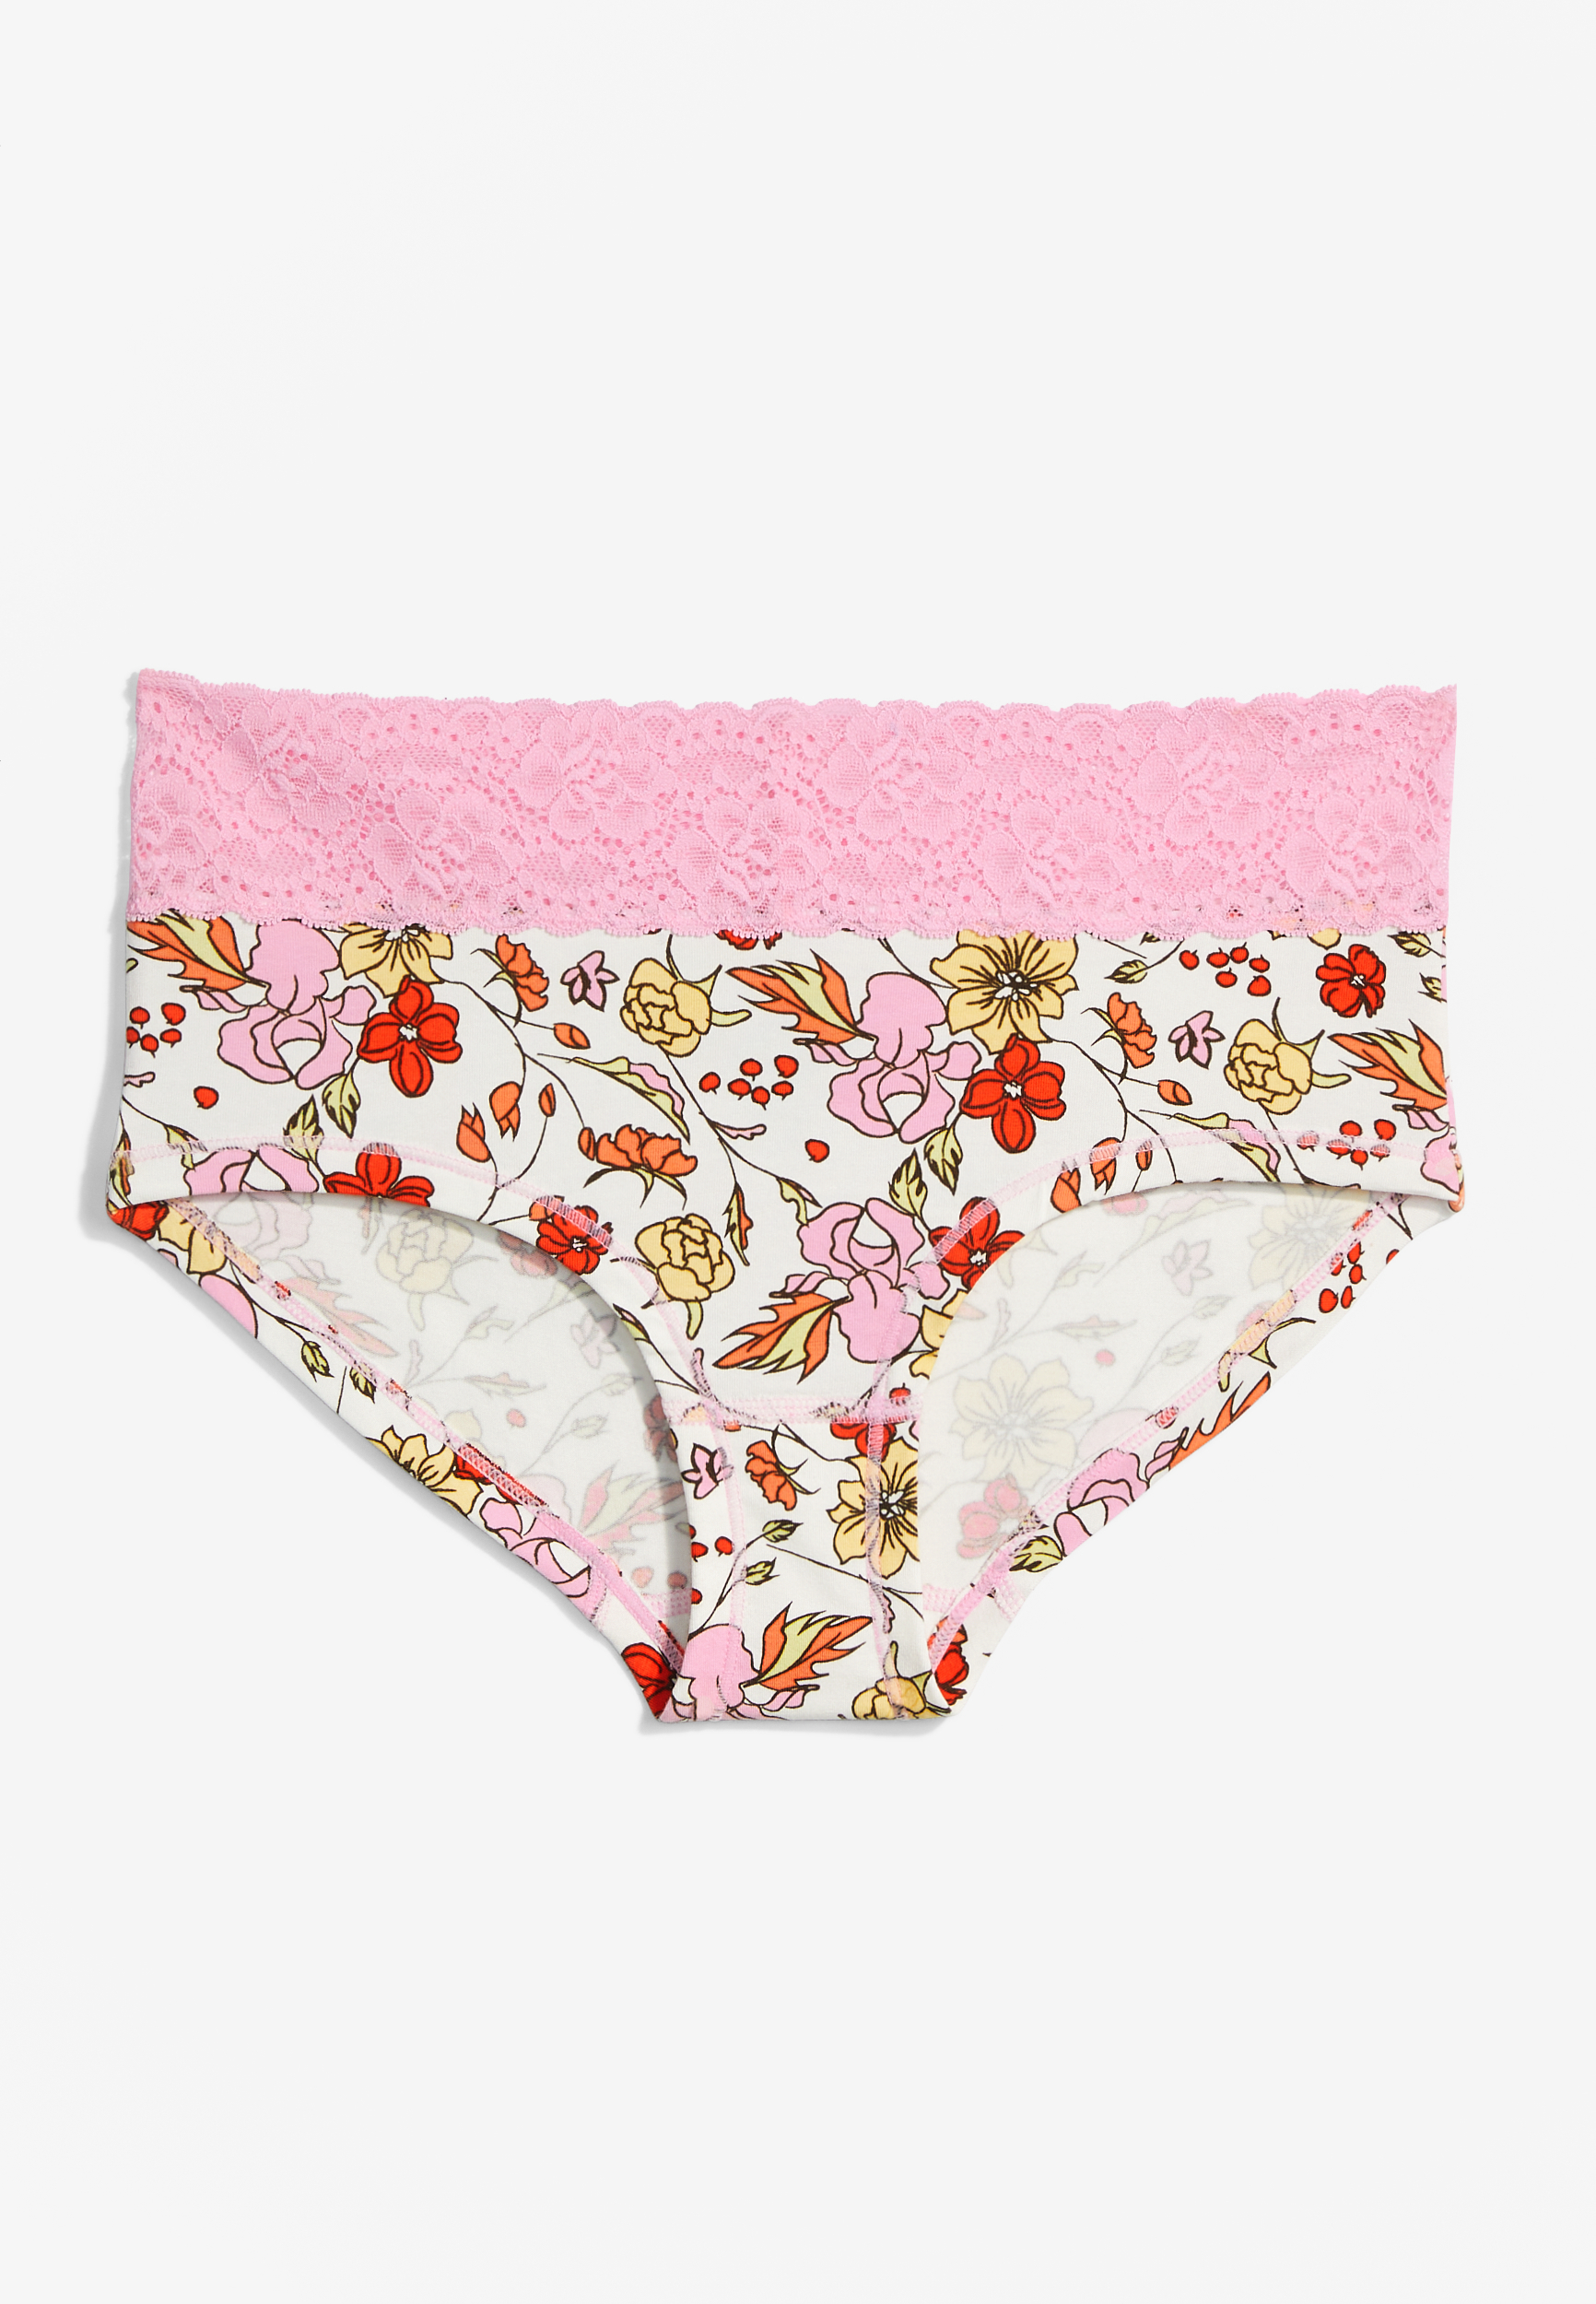 Simply Comfy Wide Lace Trim Floral Boybrief Cotton Panty | maurices